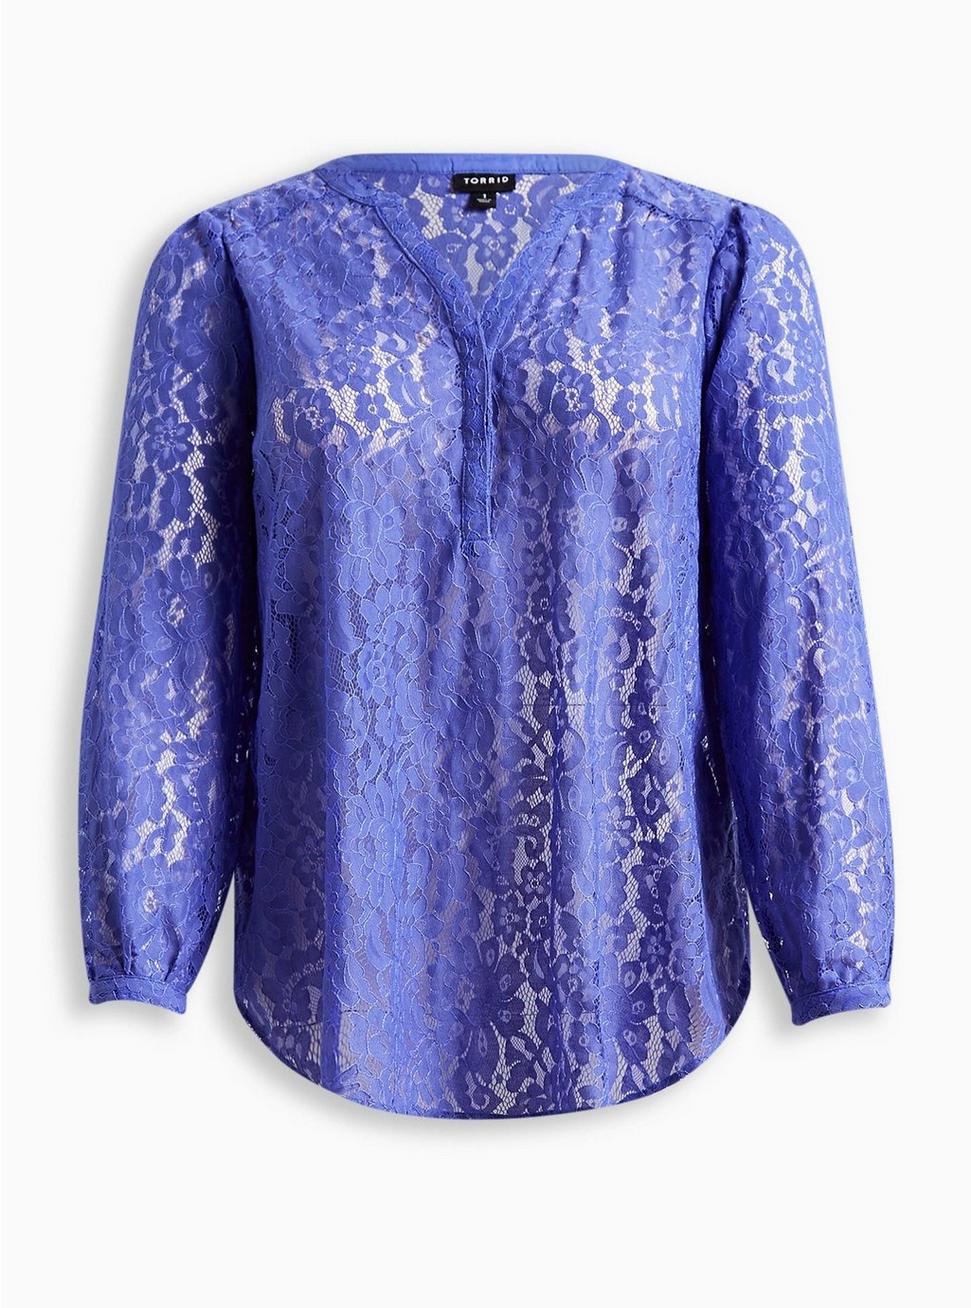 Harper Lace Pullover Long Sleeve Blouse, ABSTRACT BLUE, hi-res